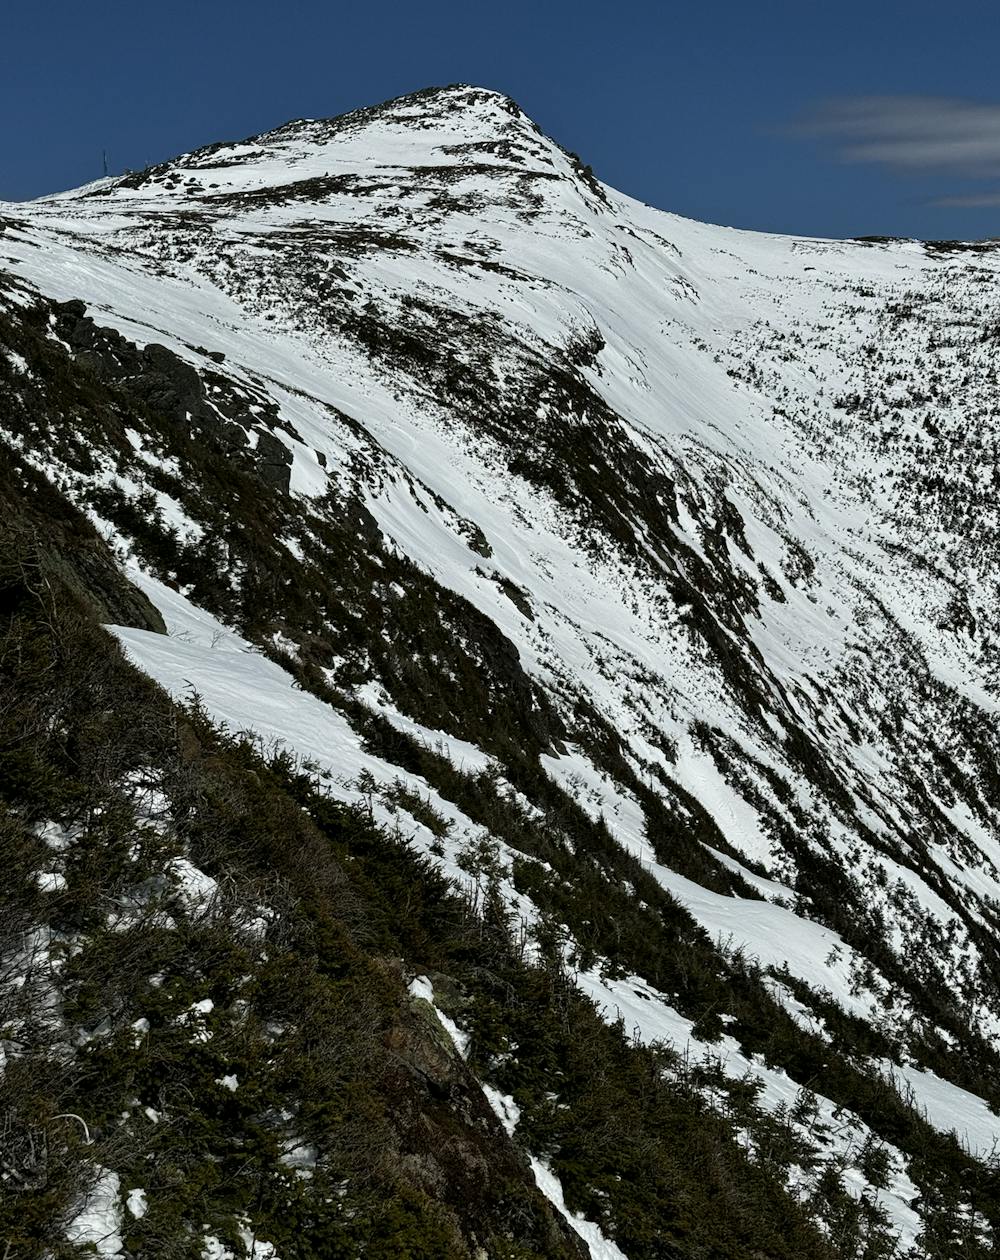 Single track on Franklin Headwall, as seen from Bifocal